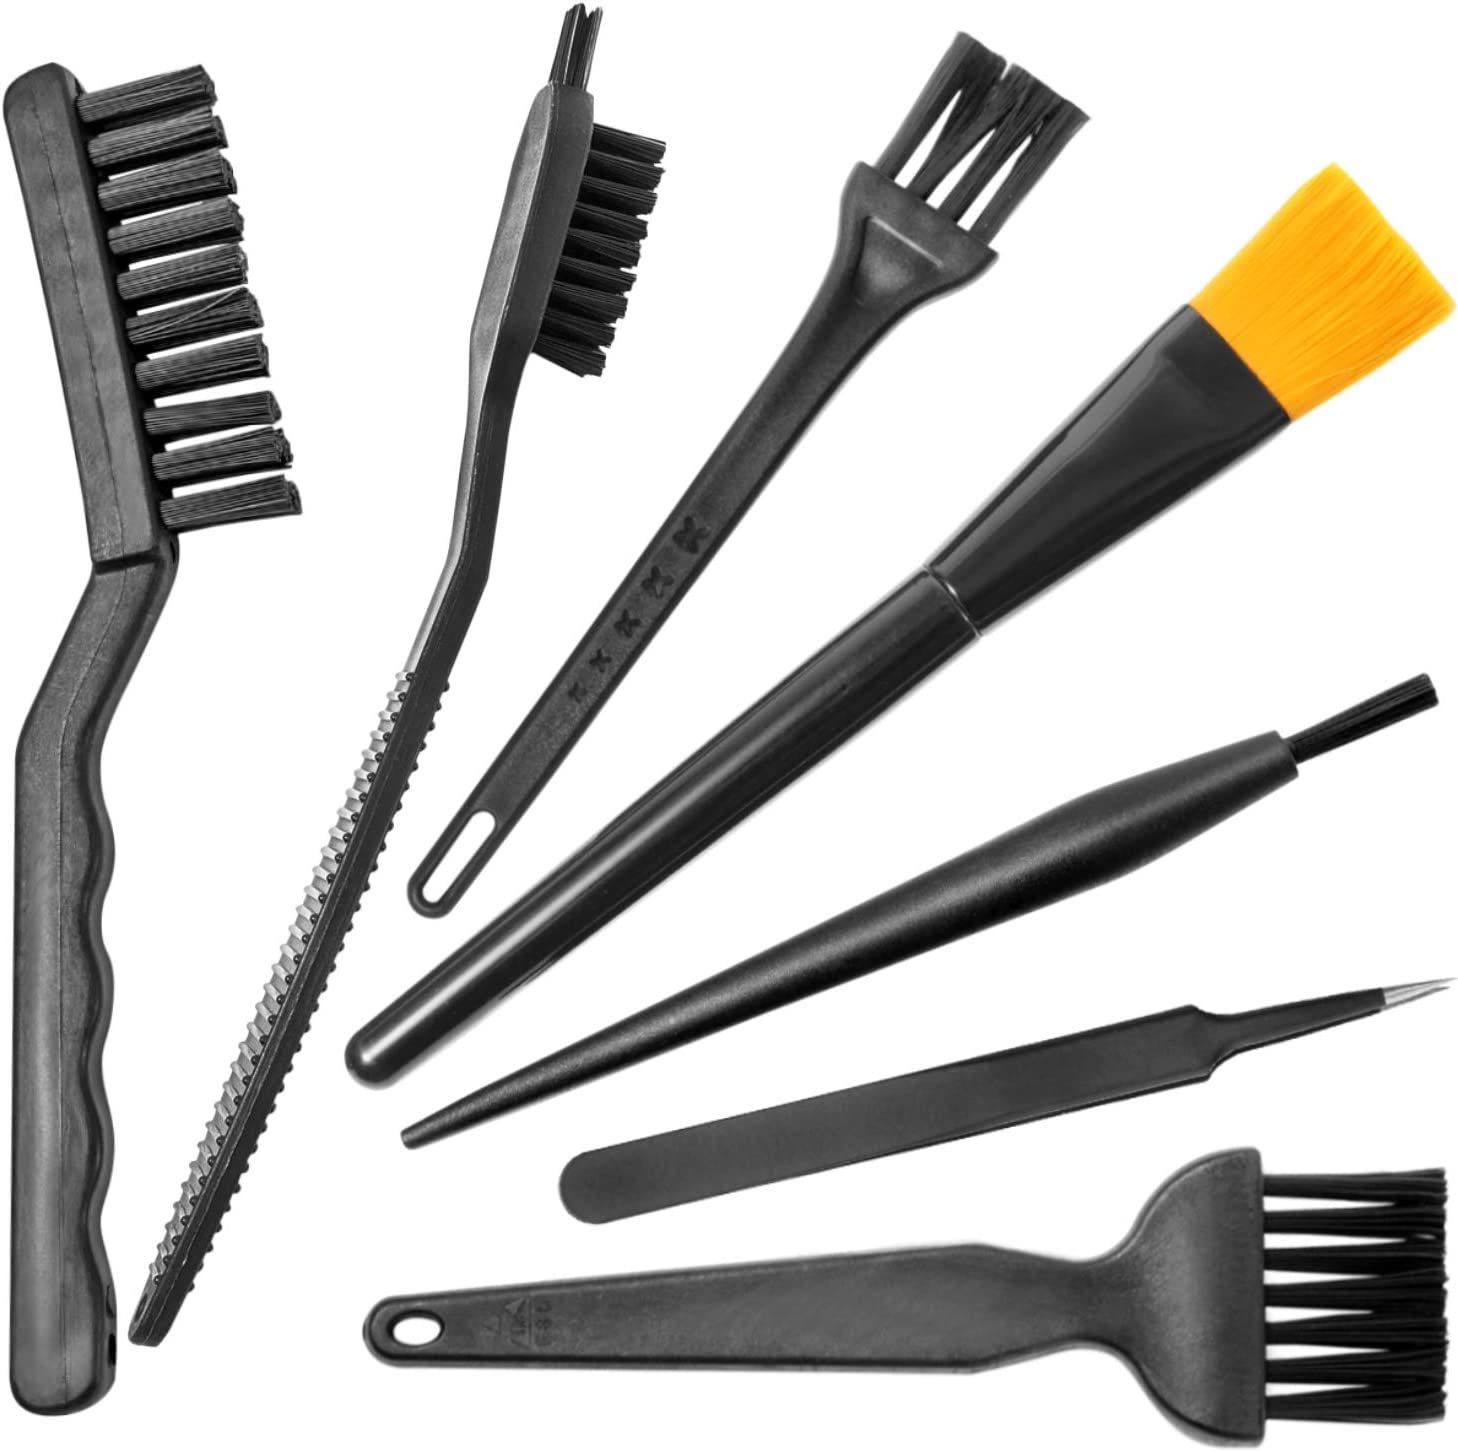 Best Computer Key Brushes for Cleaning Devices